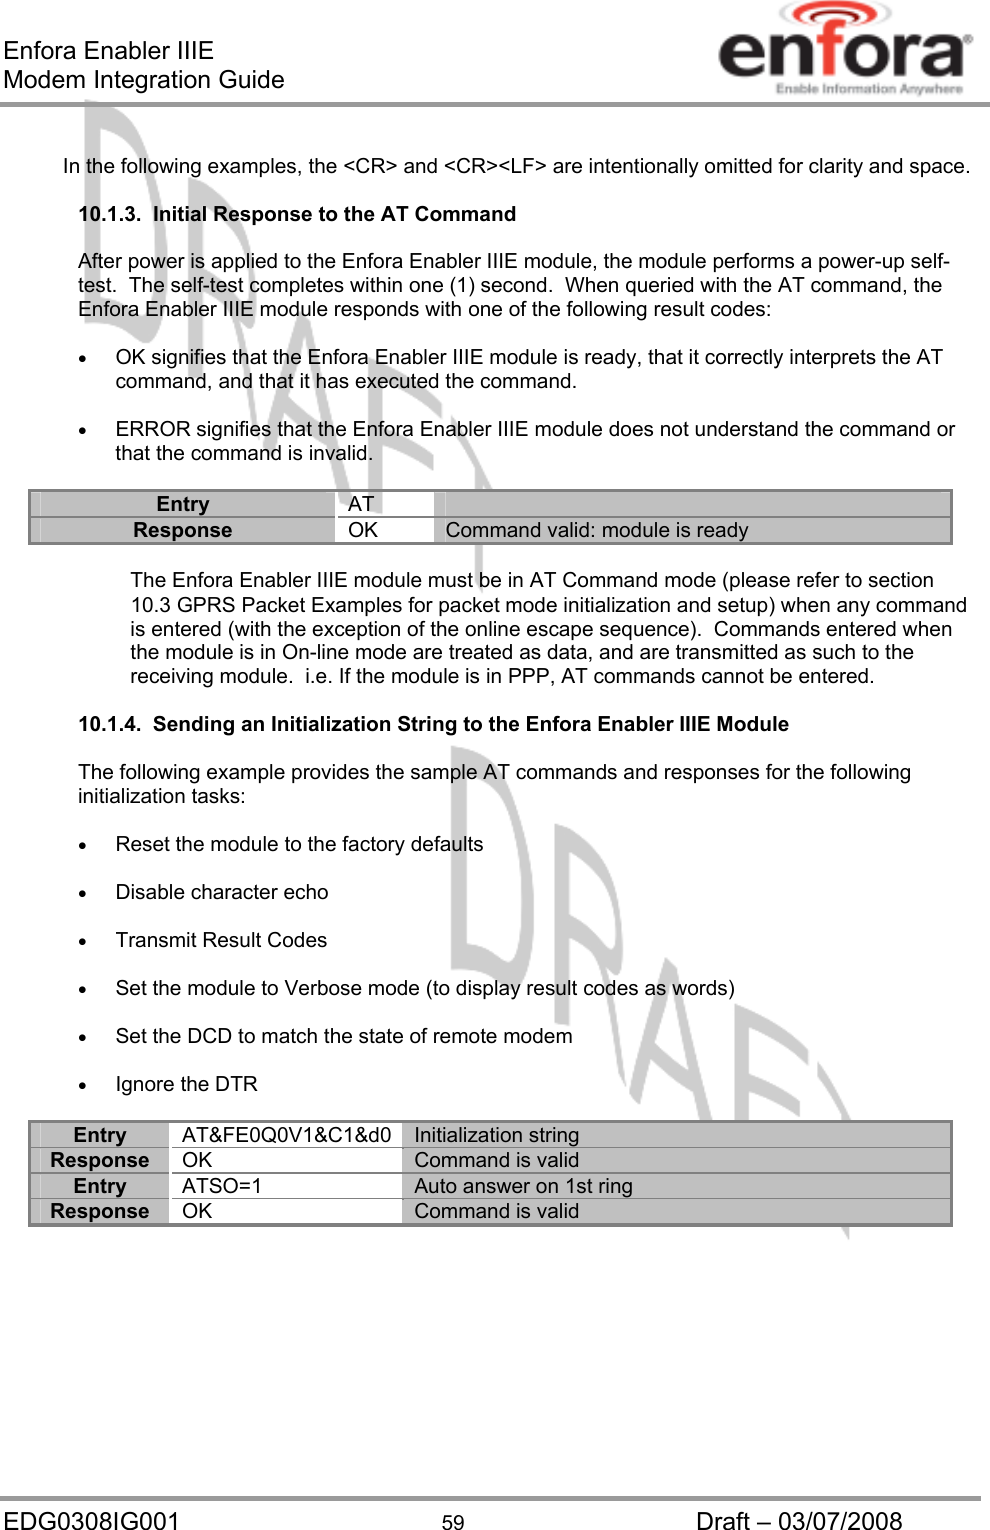 Enfora Enabler IIIE Modem Integration Guide EDG0308IG001  59  Draft – 03/07/2008  In the following examples, the &lt;CR&gt; and &lt;CR&gt;&lt;LF&gt; are intentionally omitted for clarity and space.  10.1.3.  Initial Response to the AT Command  After power is applied to the Enfora Enabler IIIE module, the module performs a power-up self-test.  The self-test completes within one (1) second.  When queried with the AT command, the Enfora Enabler IIIE module responds with one of the following result codes:  •  OK signifies that the Enfora Enabler IIIE module is ready, that it correctly interprets the AT command, and that it has executed the command.  •  ERROR signifies that the Enfora Enabler IIIE module does not understand the command or that the command is invalid.  Entry  AT  Response  OK  Command valid: module is ready  The Enfora Enabler IIIE module must be in AT Command mode (please refer to section 10.3 GPRS Packet Examples for packet mode initialization and setup) when any command is entered (with the exception of the online escape sequence).  Commands entered when the module is in On-line mode are treated as data, and are transmitted as such to the receiving module.  i.e. If the module is in PPP, AT commands cannot be entered.  10.1.4.  Sending an Initialization String to the Enfora Enabler IIIE Module  The following example provides the sample AT commands and responses for the following initialization tasks:  •  Reset the module to the factory defaults  •  Disable character echo  •  Transmit Result Codes  •  Set the module to Verbose mode (to display result codes as words)  •  Set the DCD to match the state of remote modem  •  Ignore the DTR  Entry AT&amp;FE0Q0V1&amp;C1&amp;d0 Initialization string Response  OK  Command is valid Entry  ATSO=1  Auto answer on 1st ring Response  OK  Command is valid  